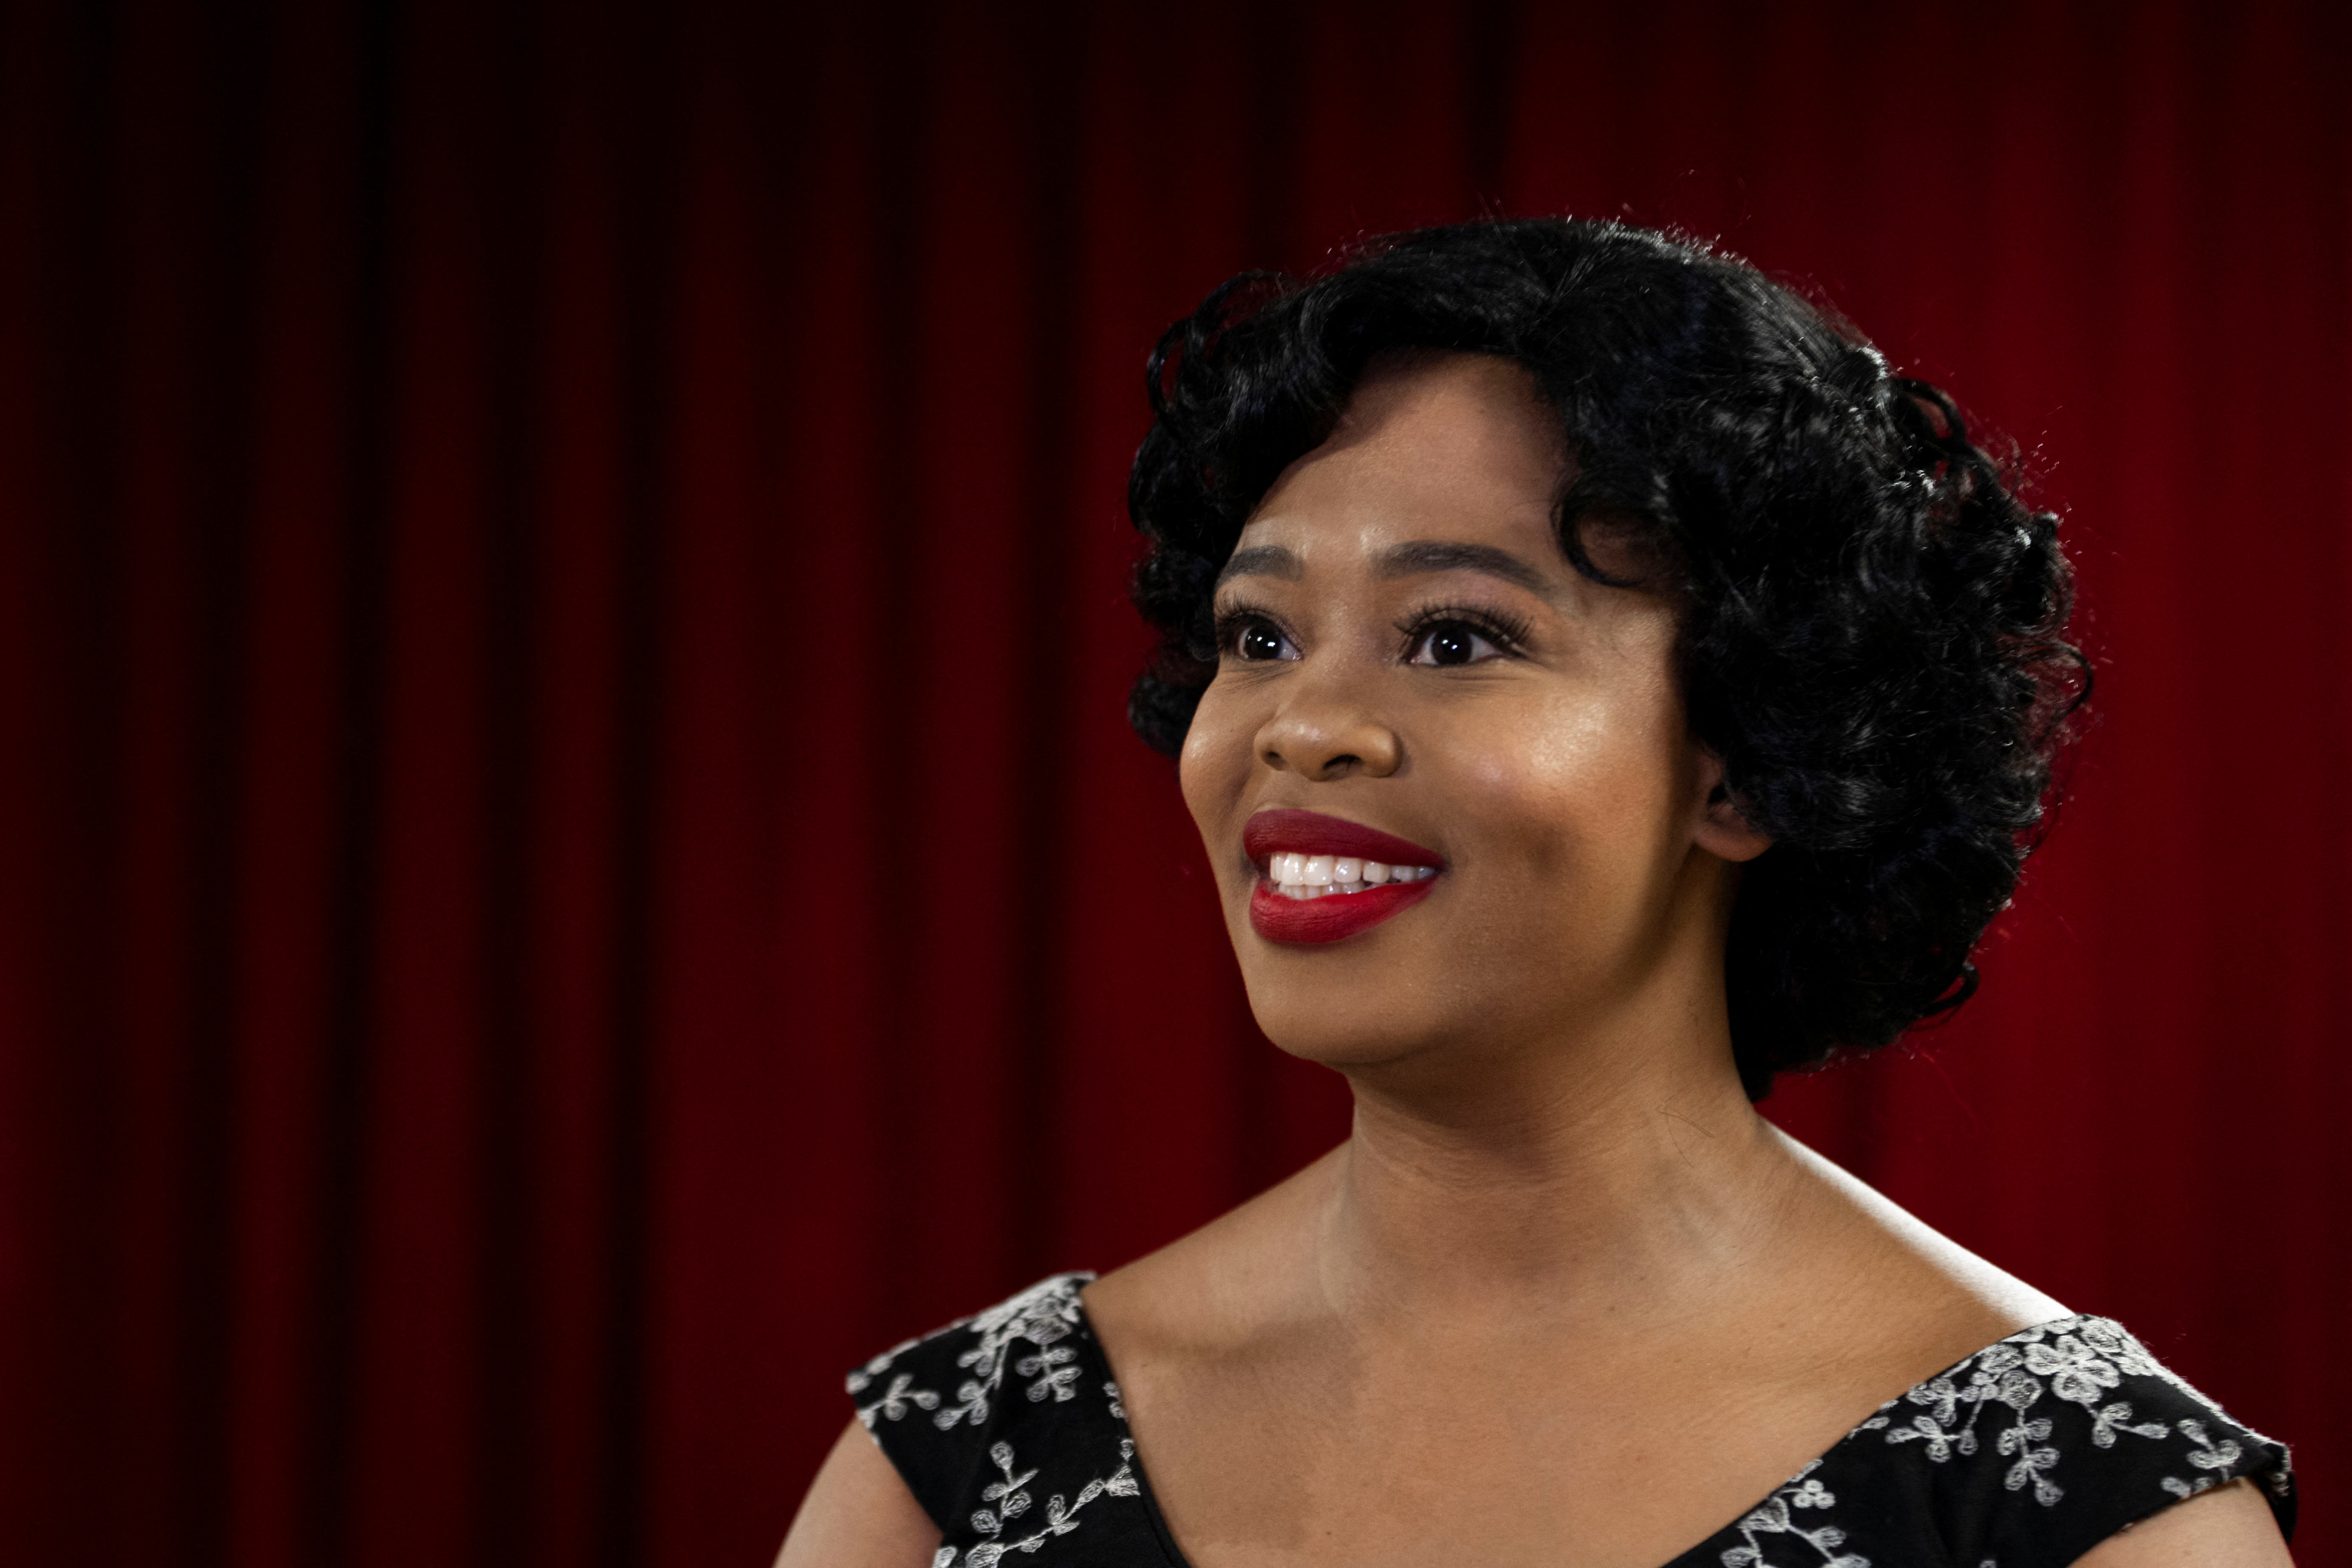 Opera star Pretty Yende poses for portraits in the Vienna State Opera